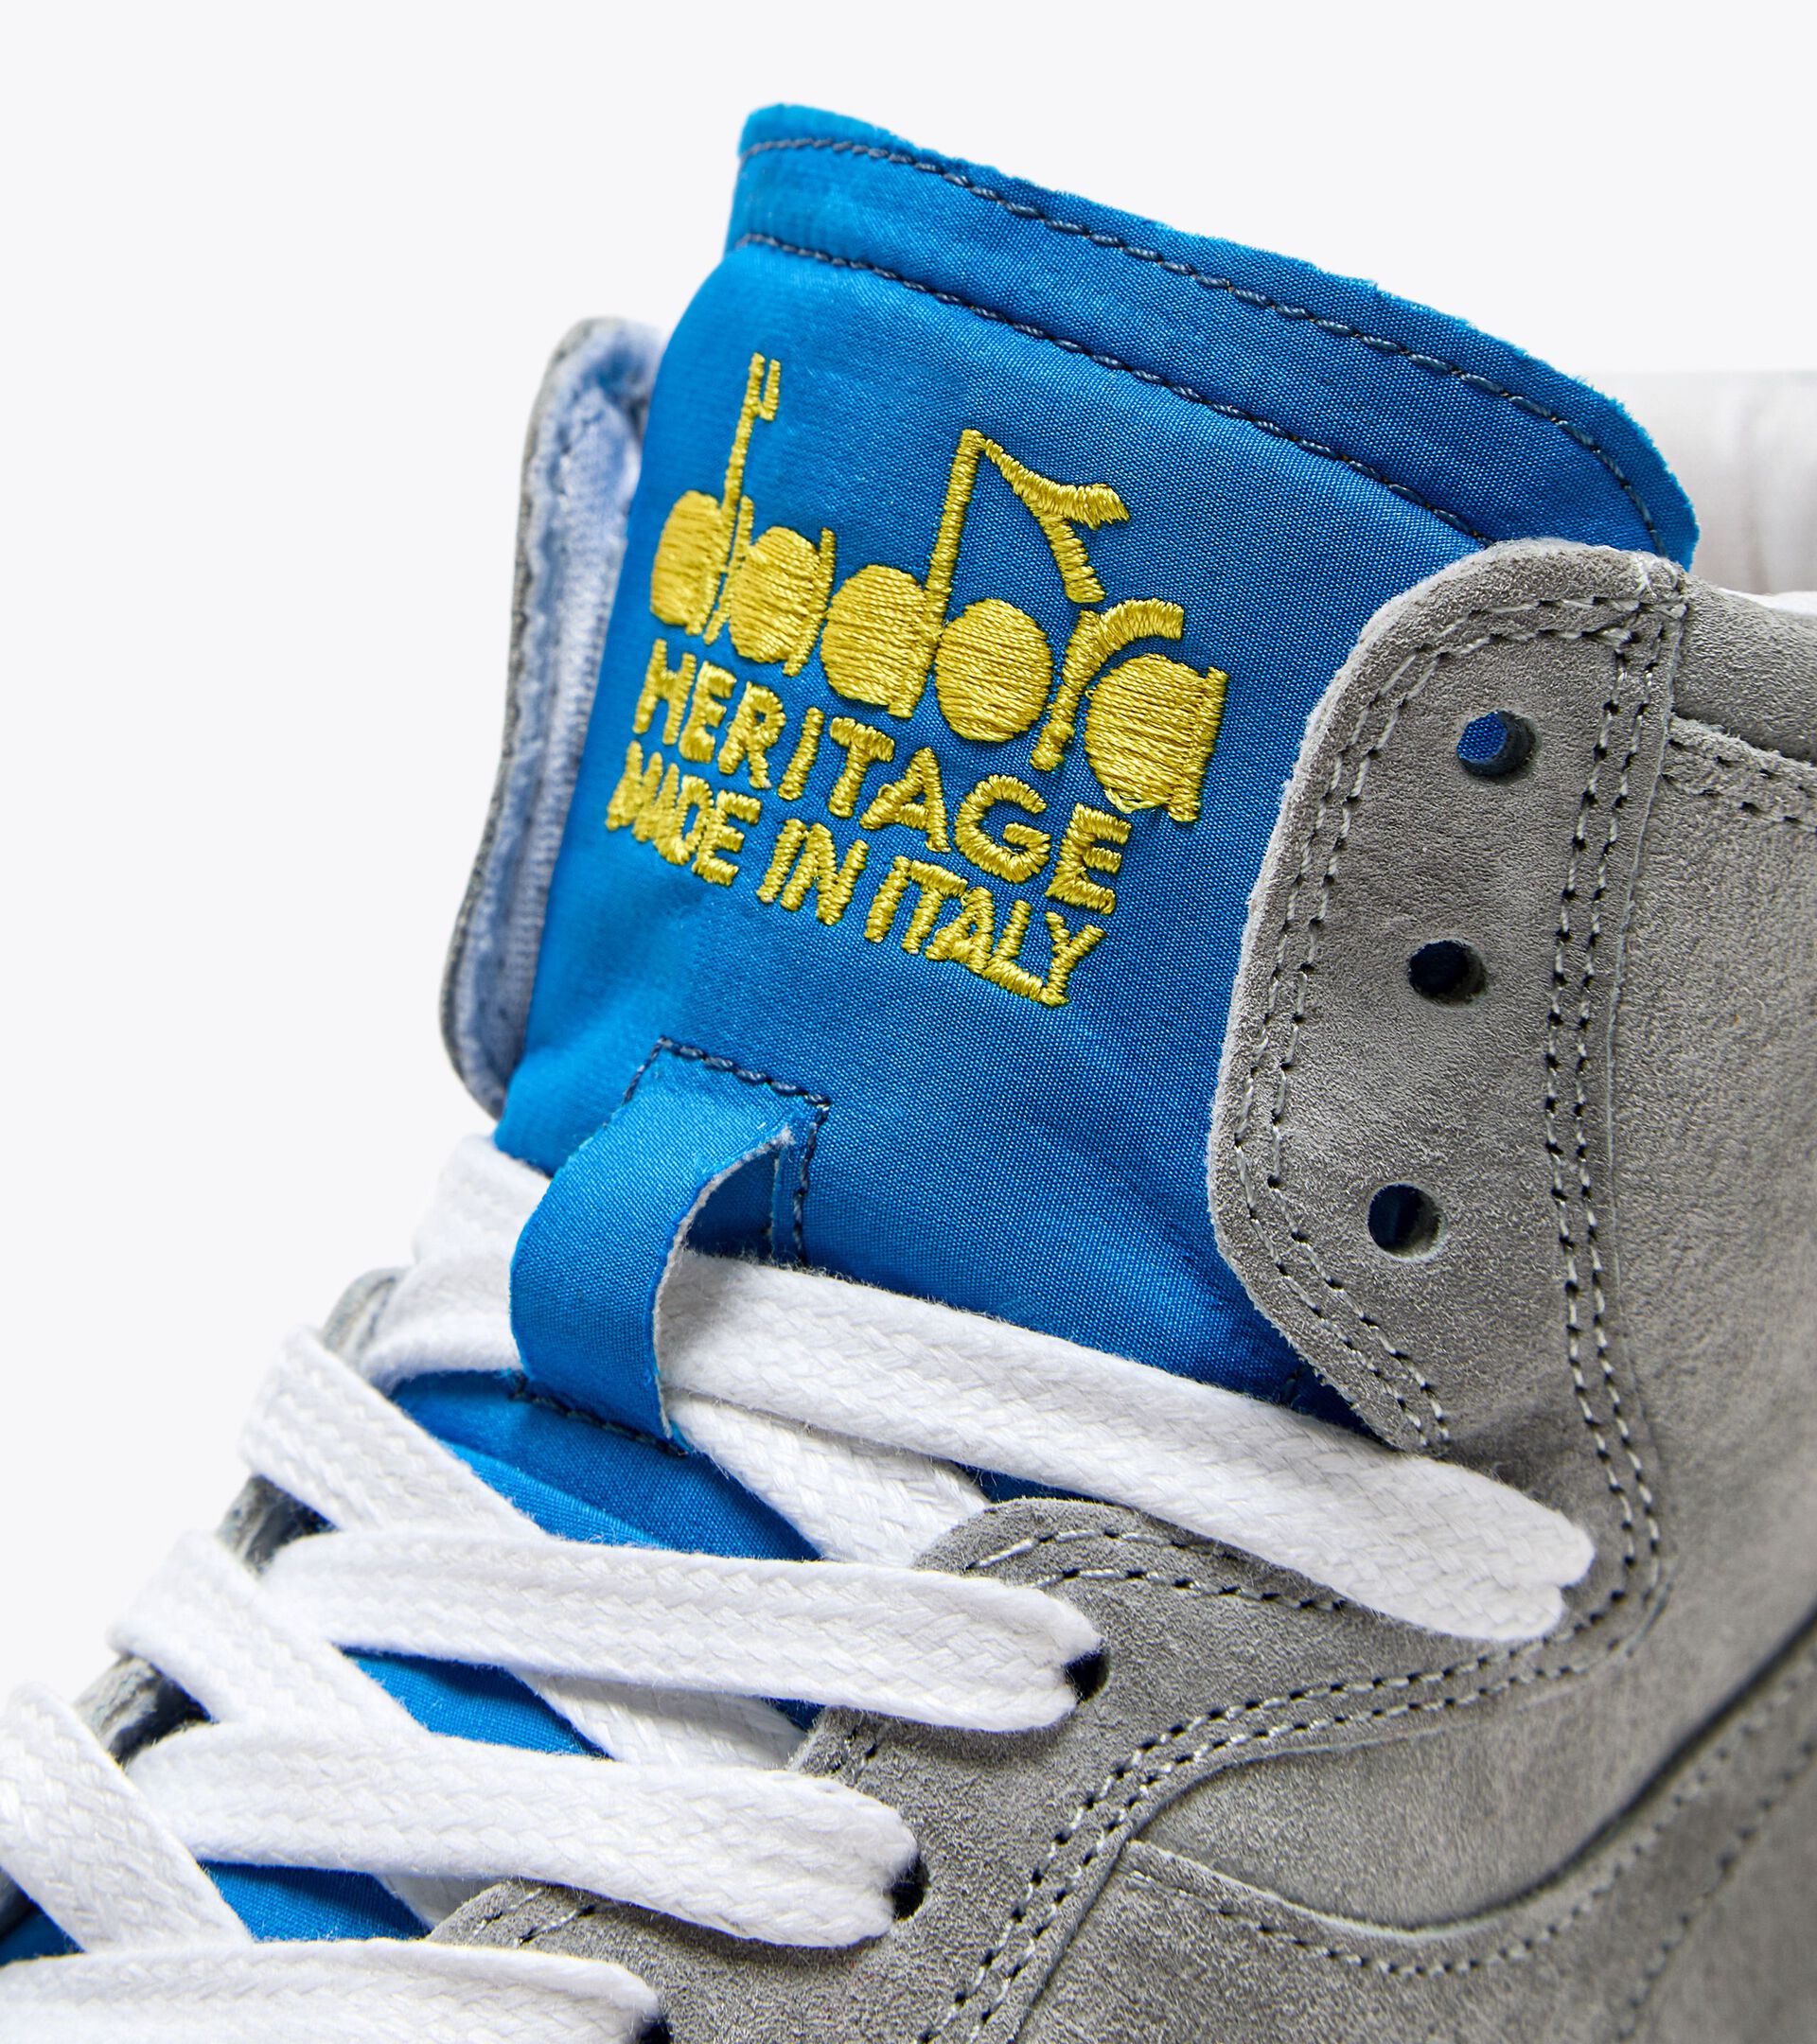 Chaussures Heritage - Made in Italy - Gender neutral MI BASKET RALLY ITALIA LUNAIRE ROCHE - Diadora